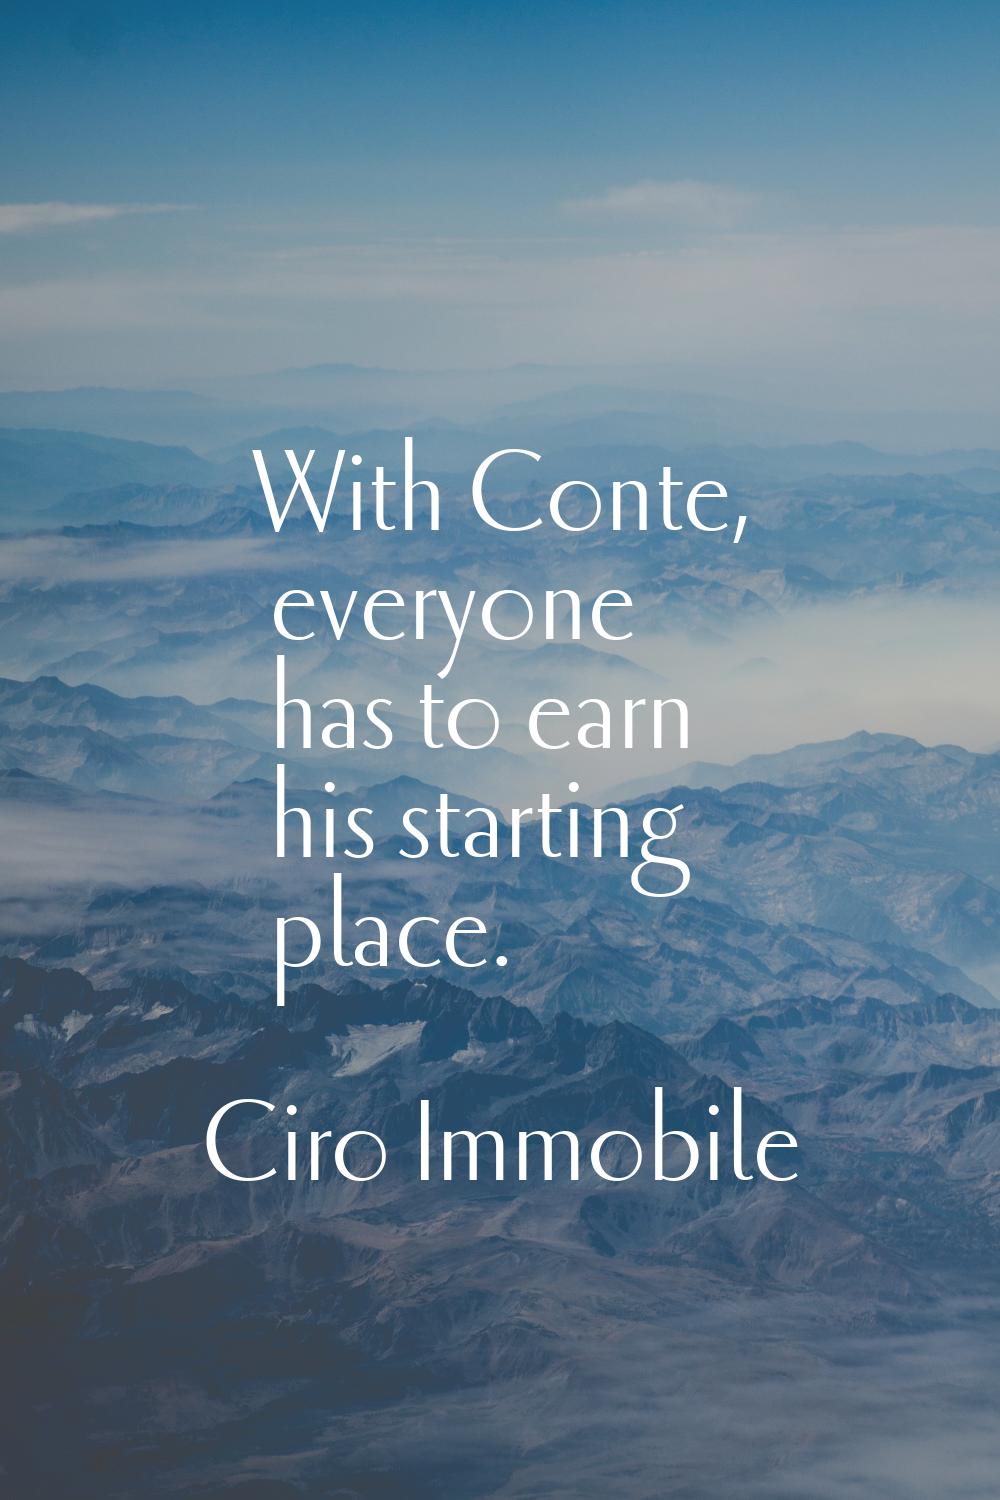 With Conte, everyone has to earn his starting place.